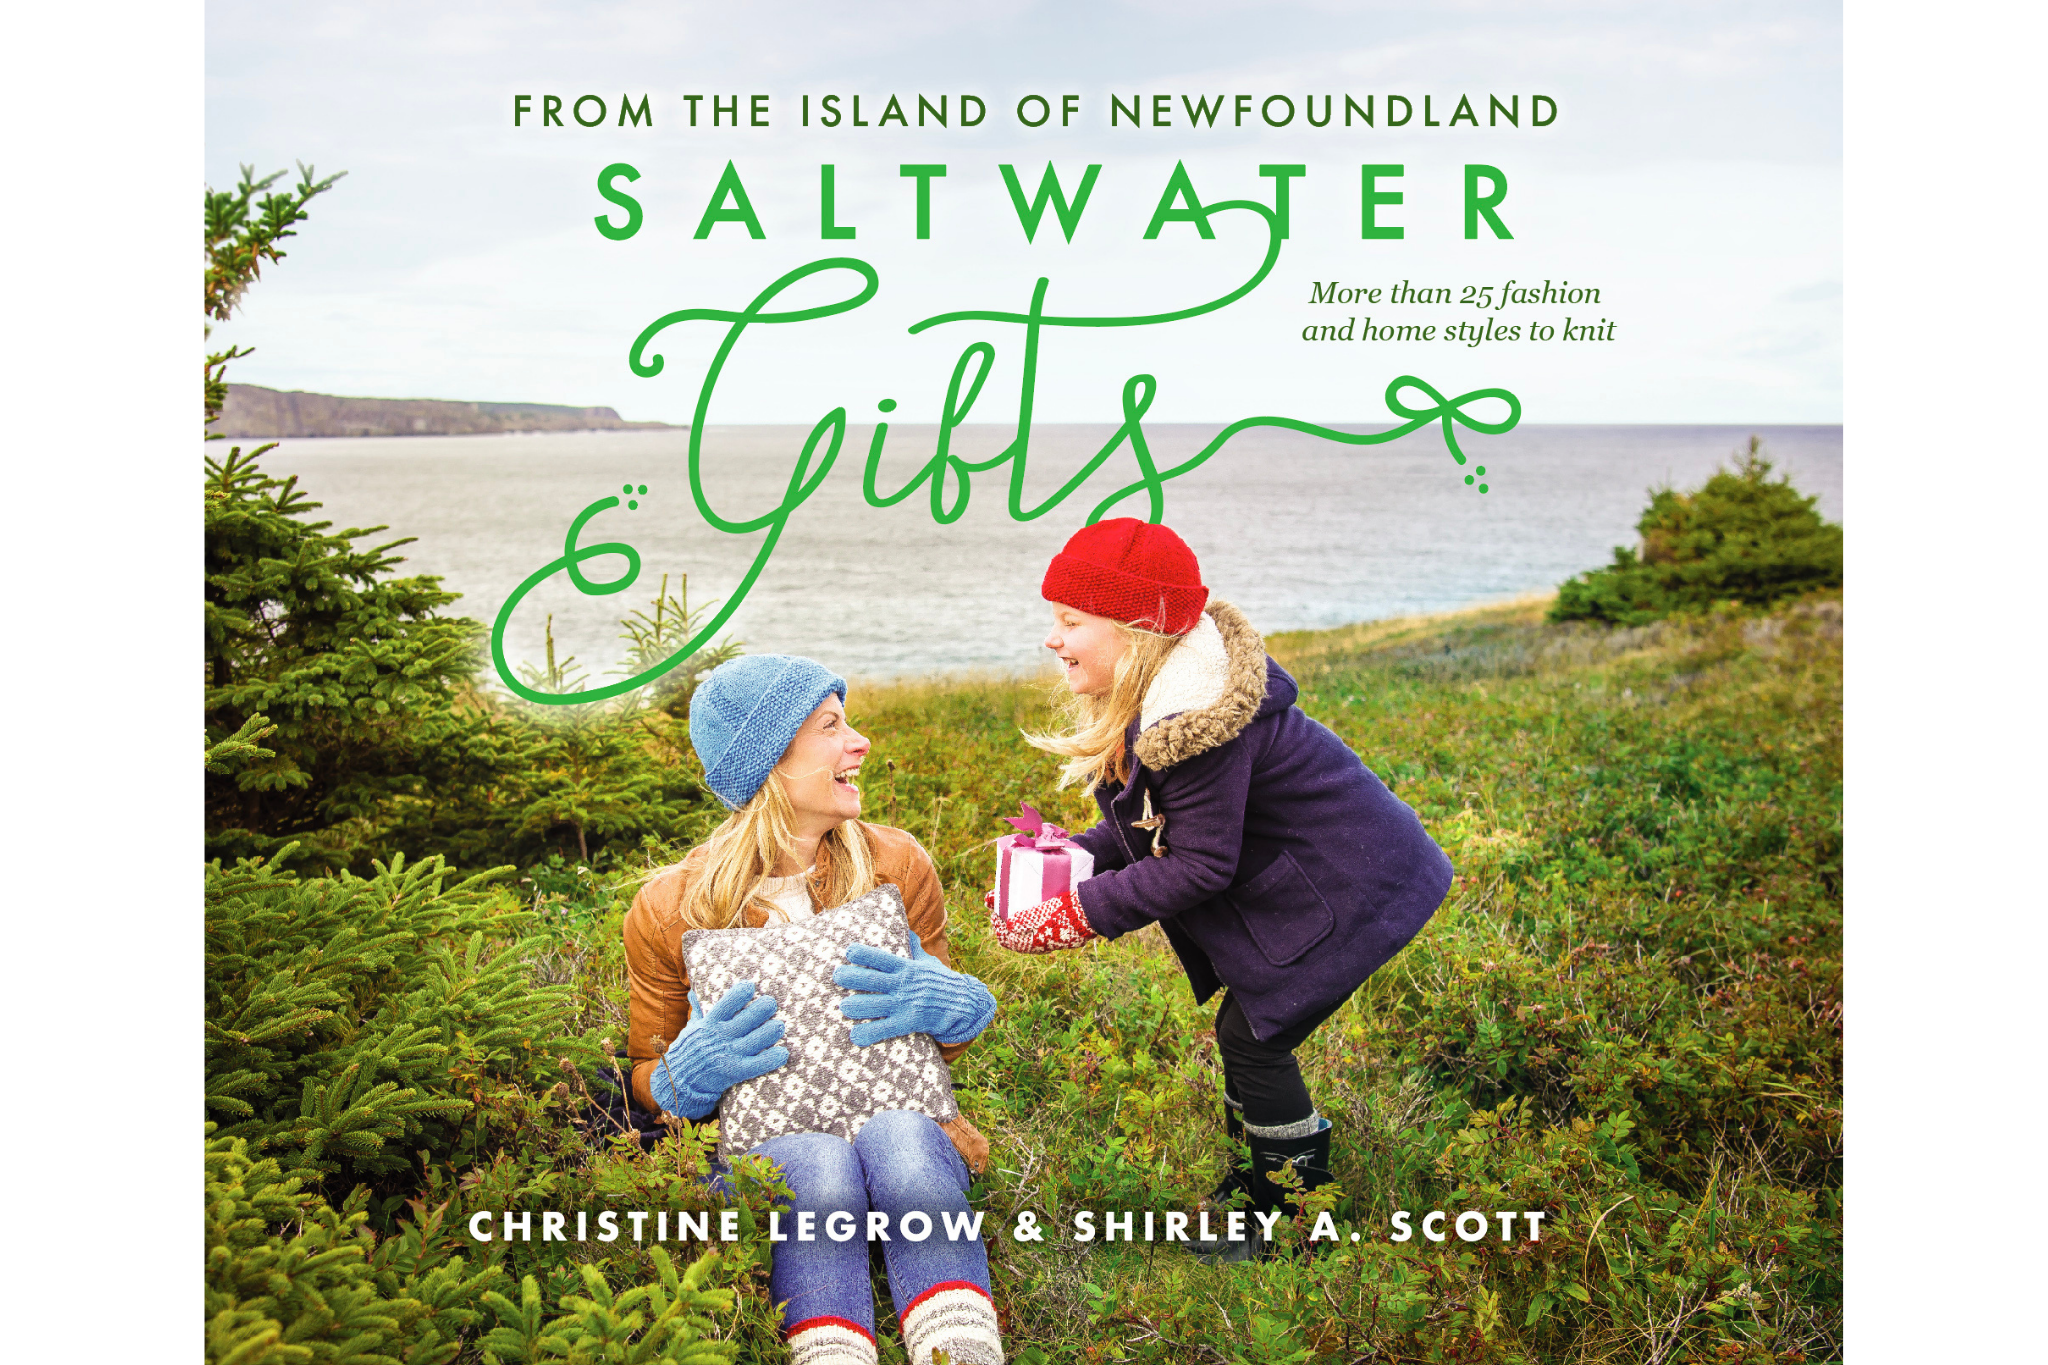 Saltwater Gifts from the Island of Newfoundland